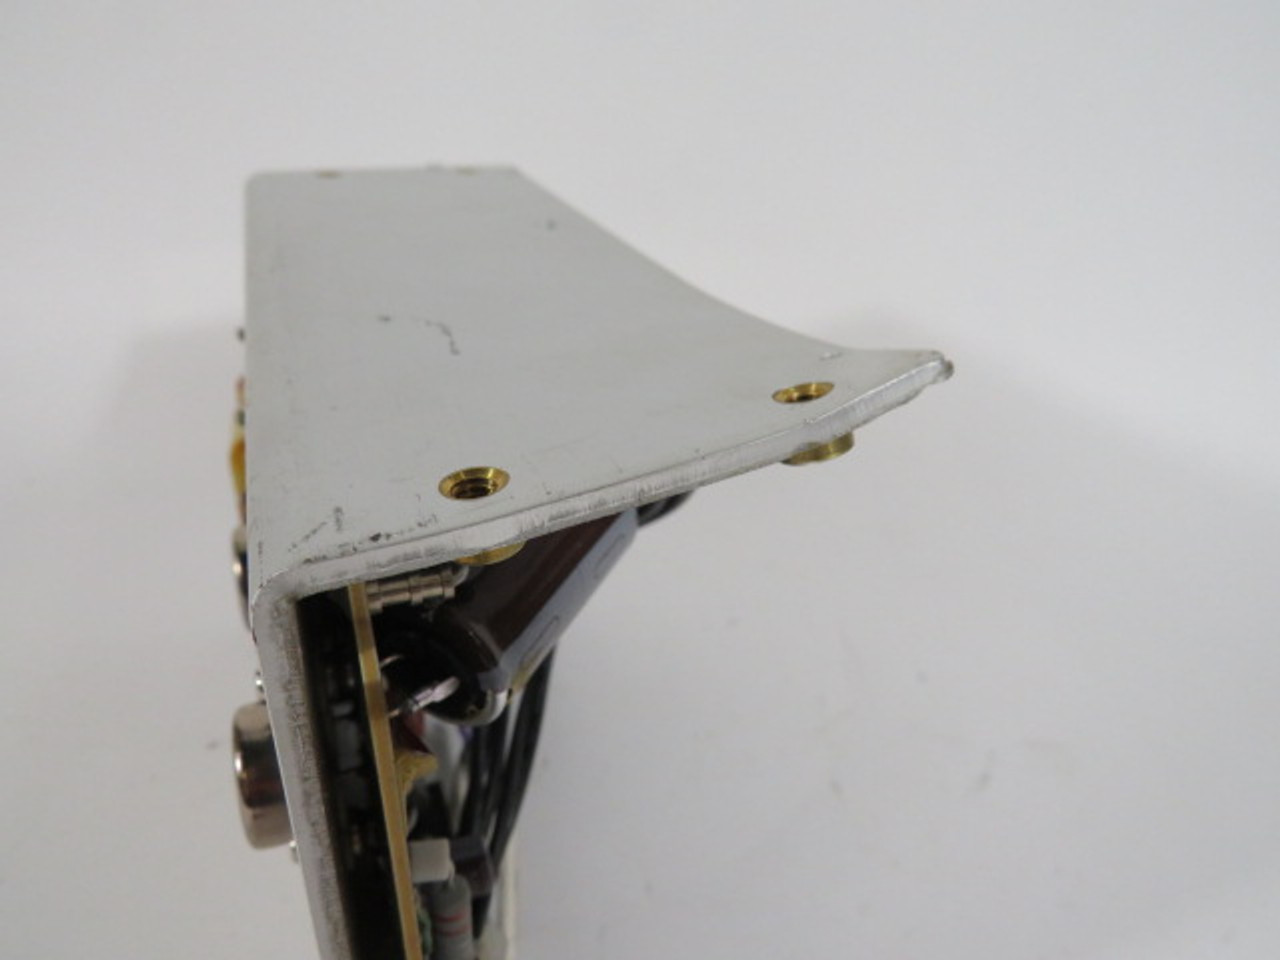 Sola SLD-12-1818-12T Power Supply 12VDC @ 1.8A Warped Cover USED